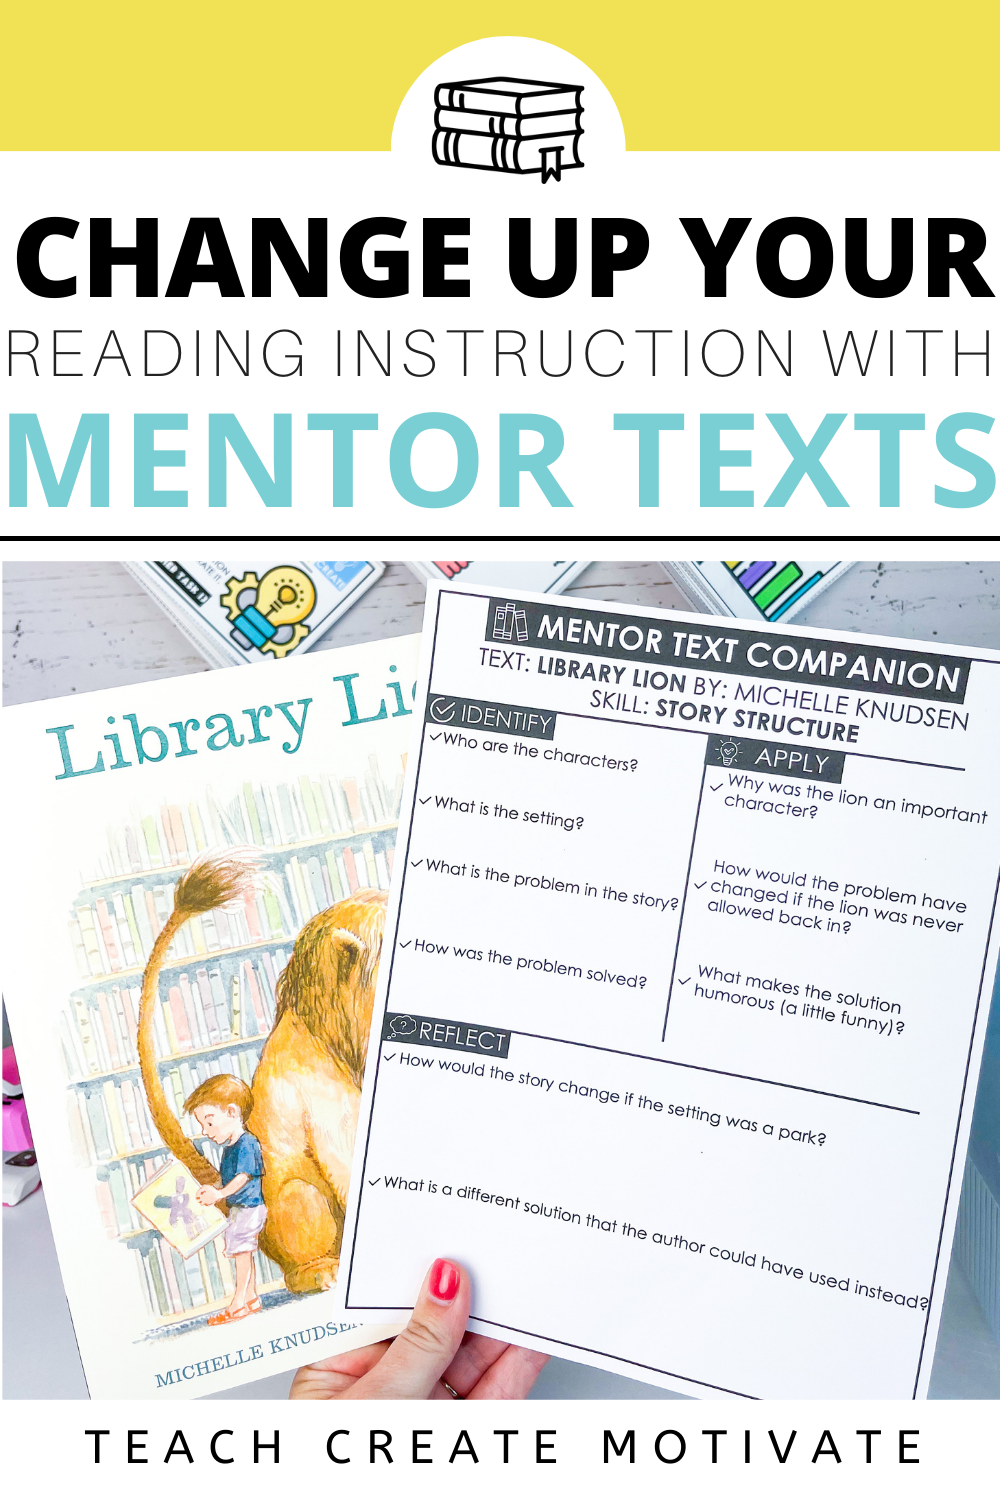 Use mentor texts to create a meaningful read aloud time that supports reading skills.